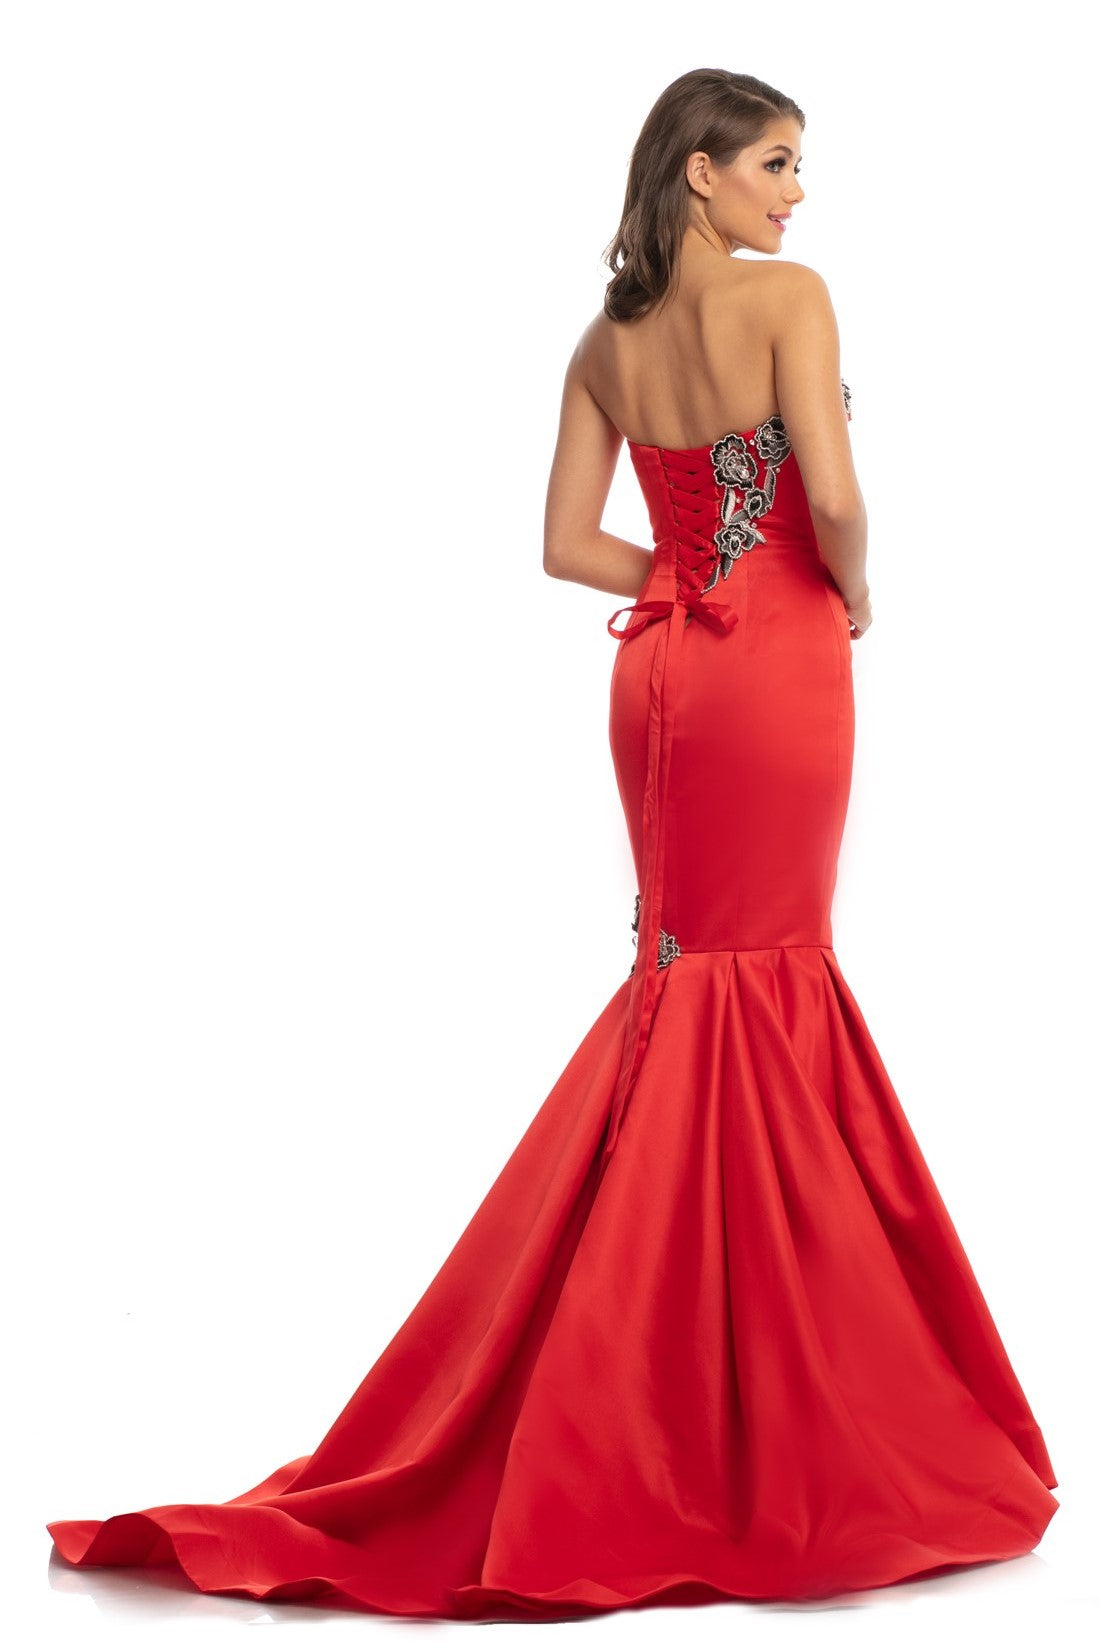 Johnathan Kayne 9030 Sating Mermaid Formal Prom Dress Pageant Gown Size 6 Red